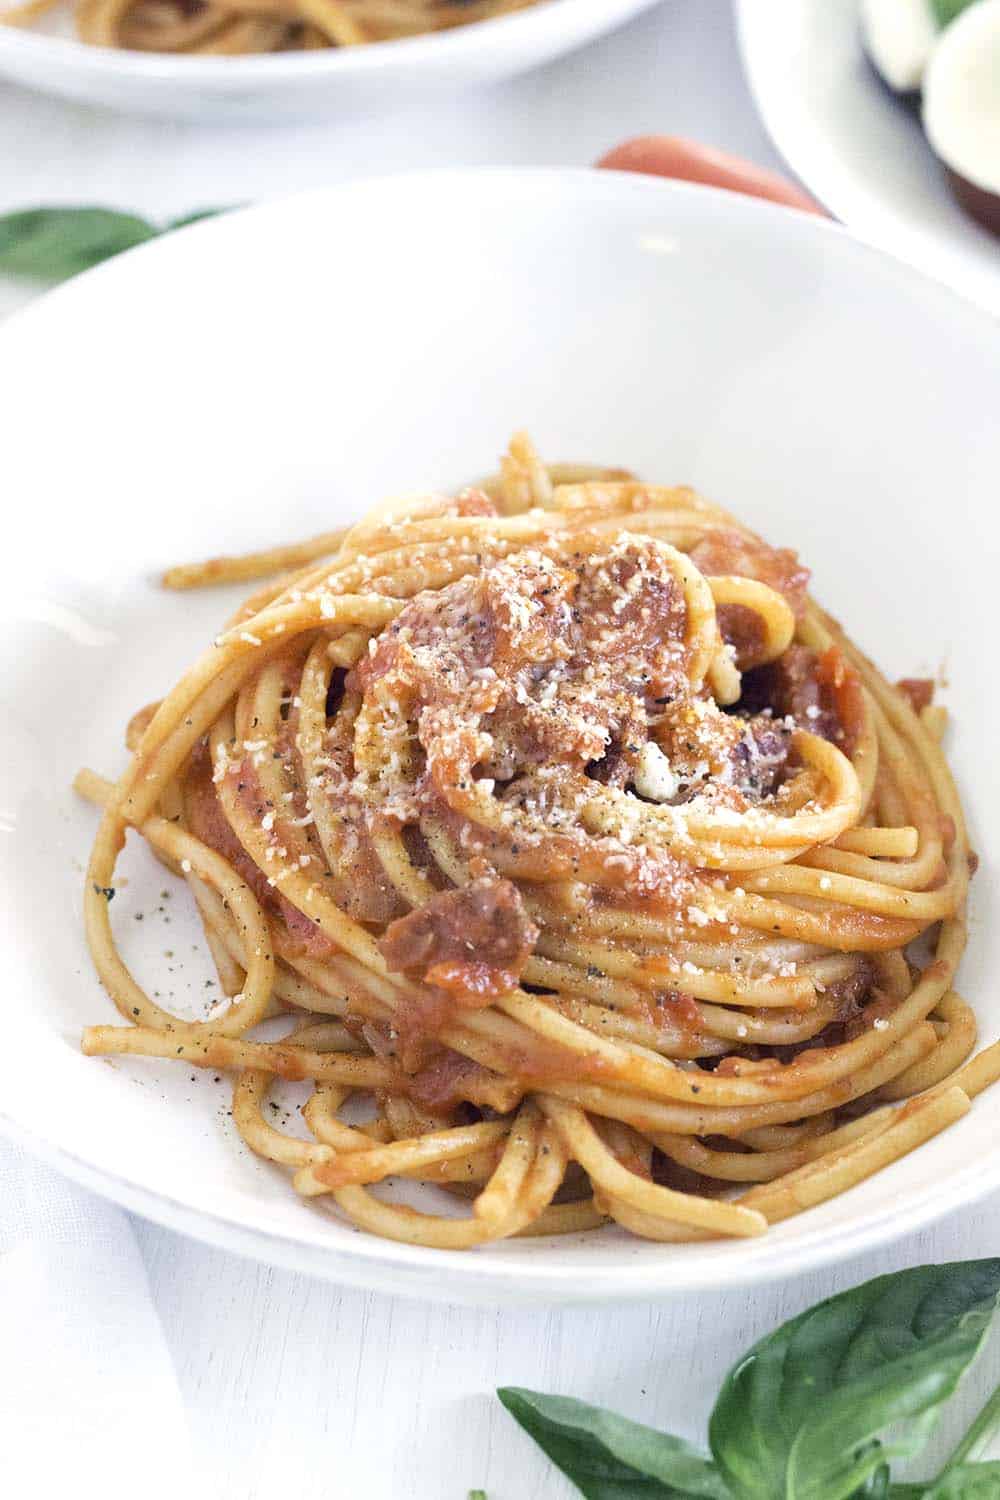 This Bucatini all'Amatriciana recipe is the real deal- authentically made with NO garlic- just a simple tomato sauce and the highest quality ingredients. You can make this amazing Italian pasta from scratch in only 30 minutes!